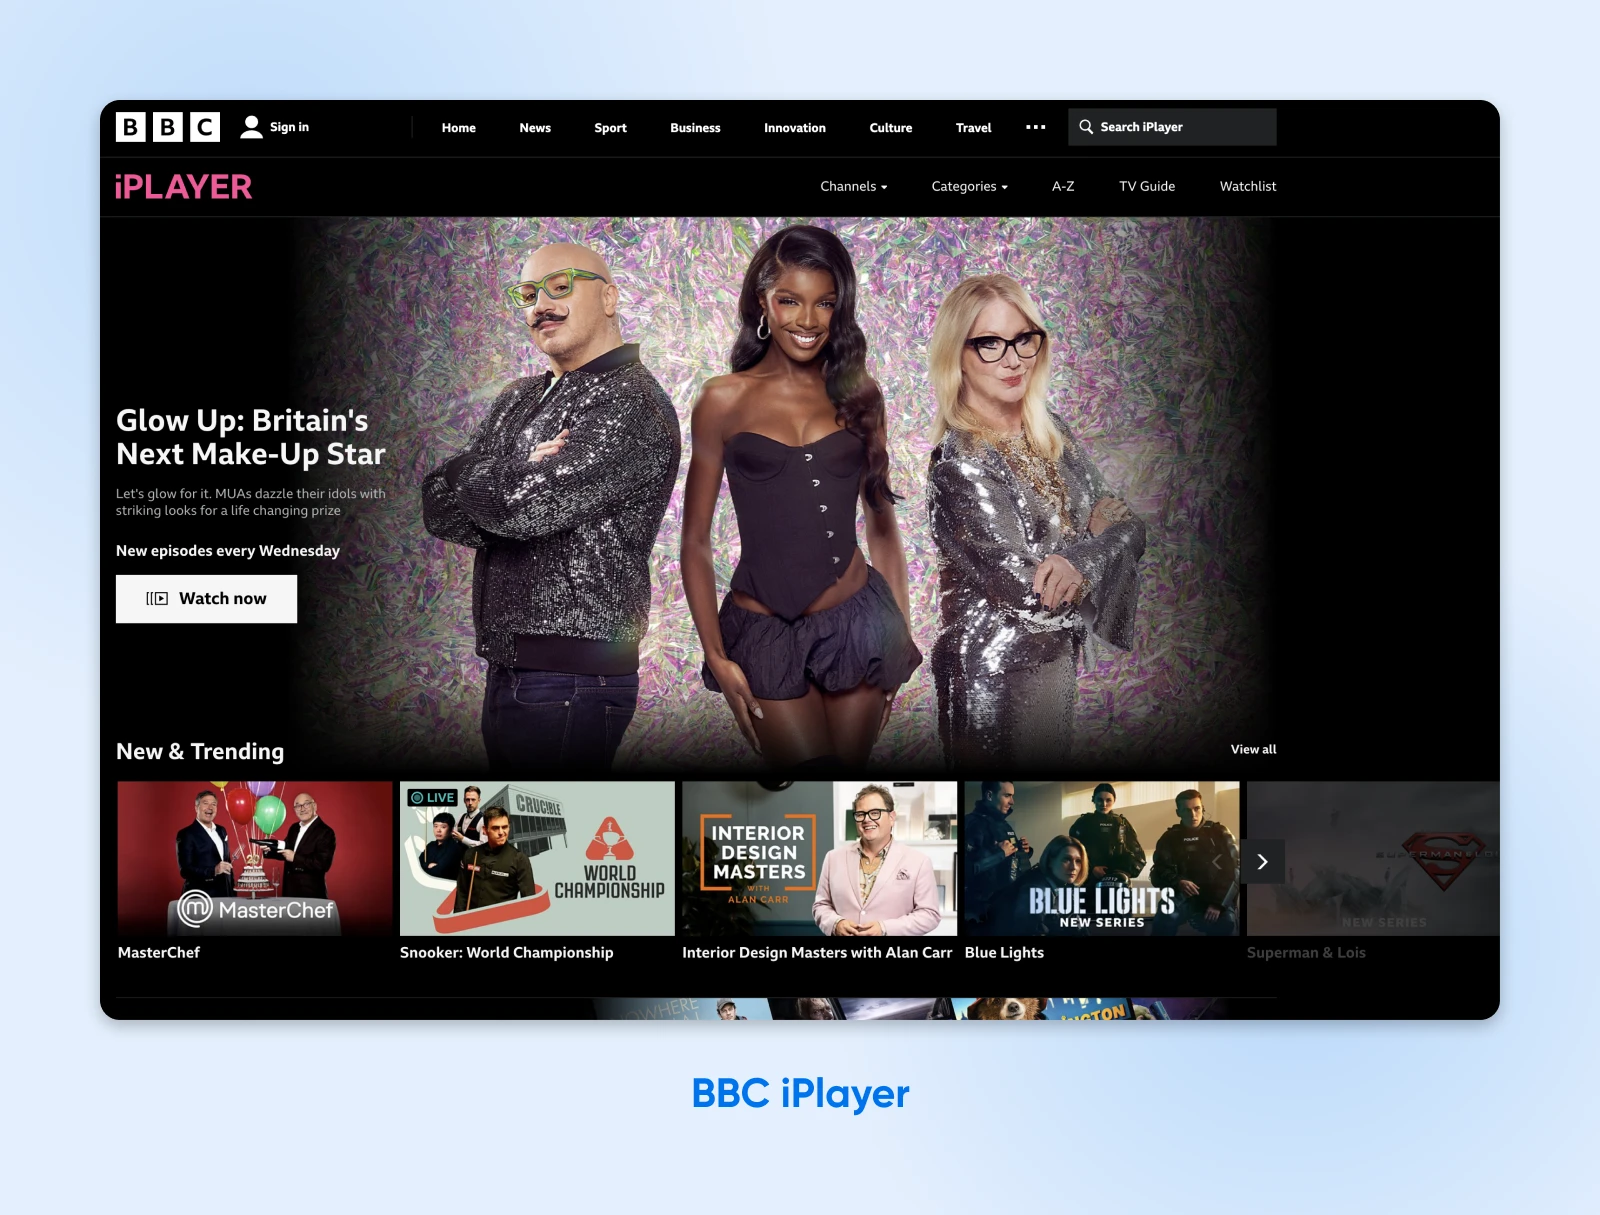 BBC iPlayer's landing page with a featured show in the hero section and "New & Trending" shows beneath. 